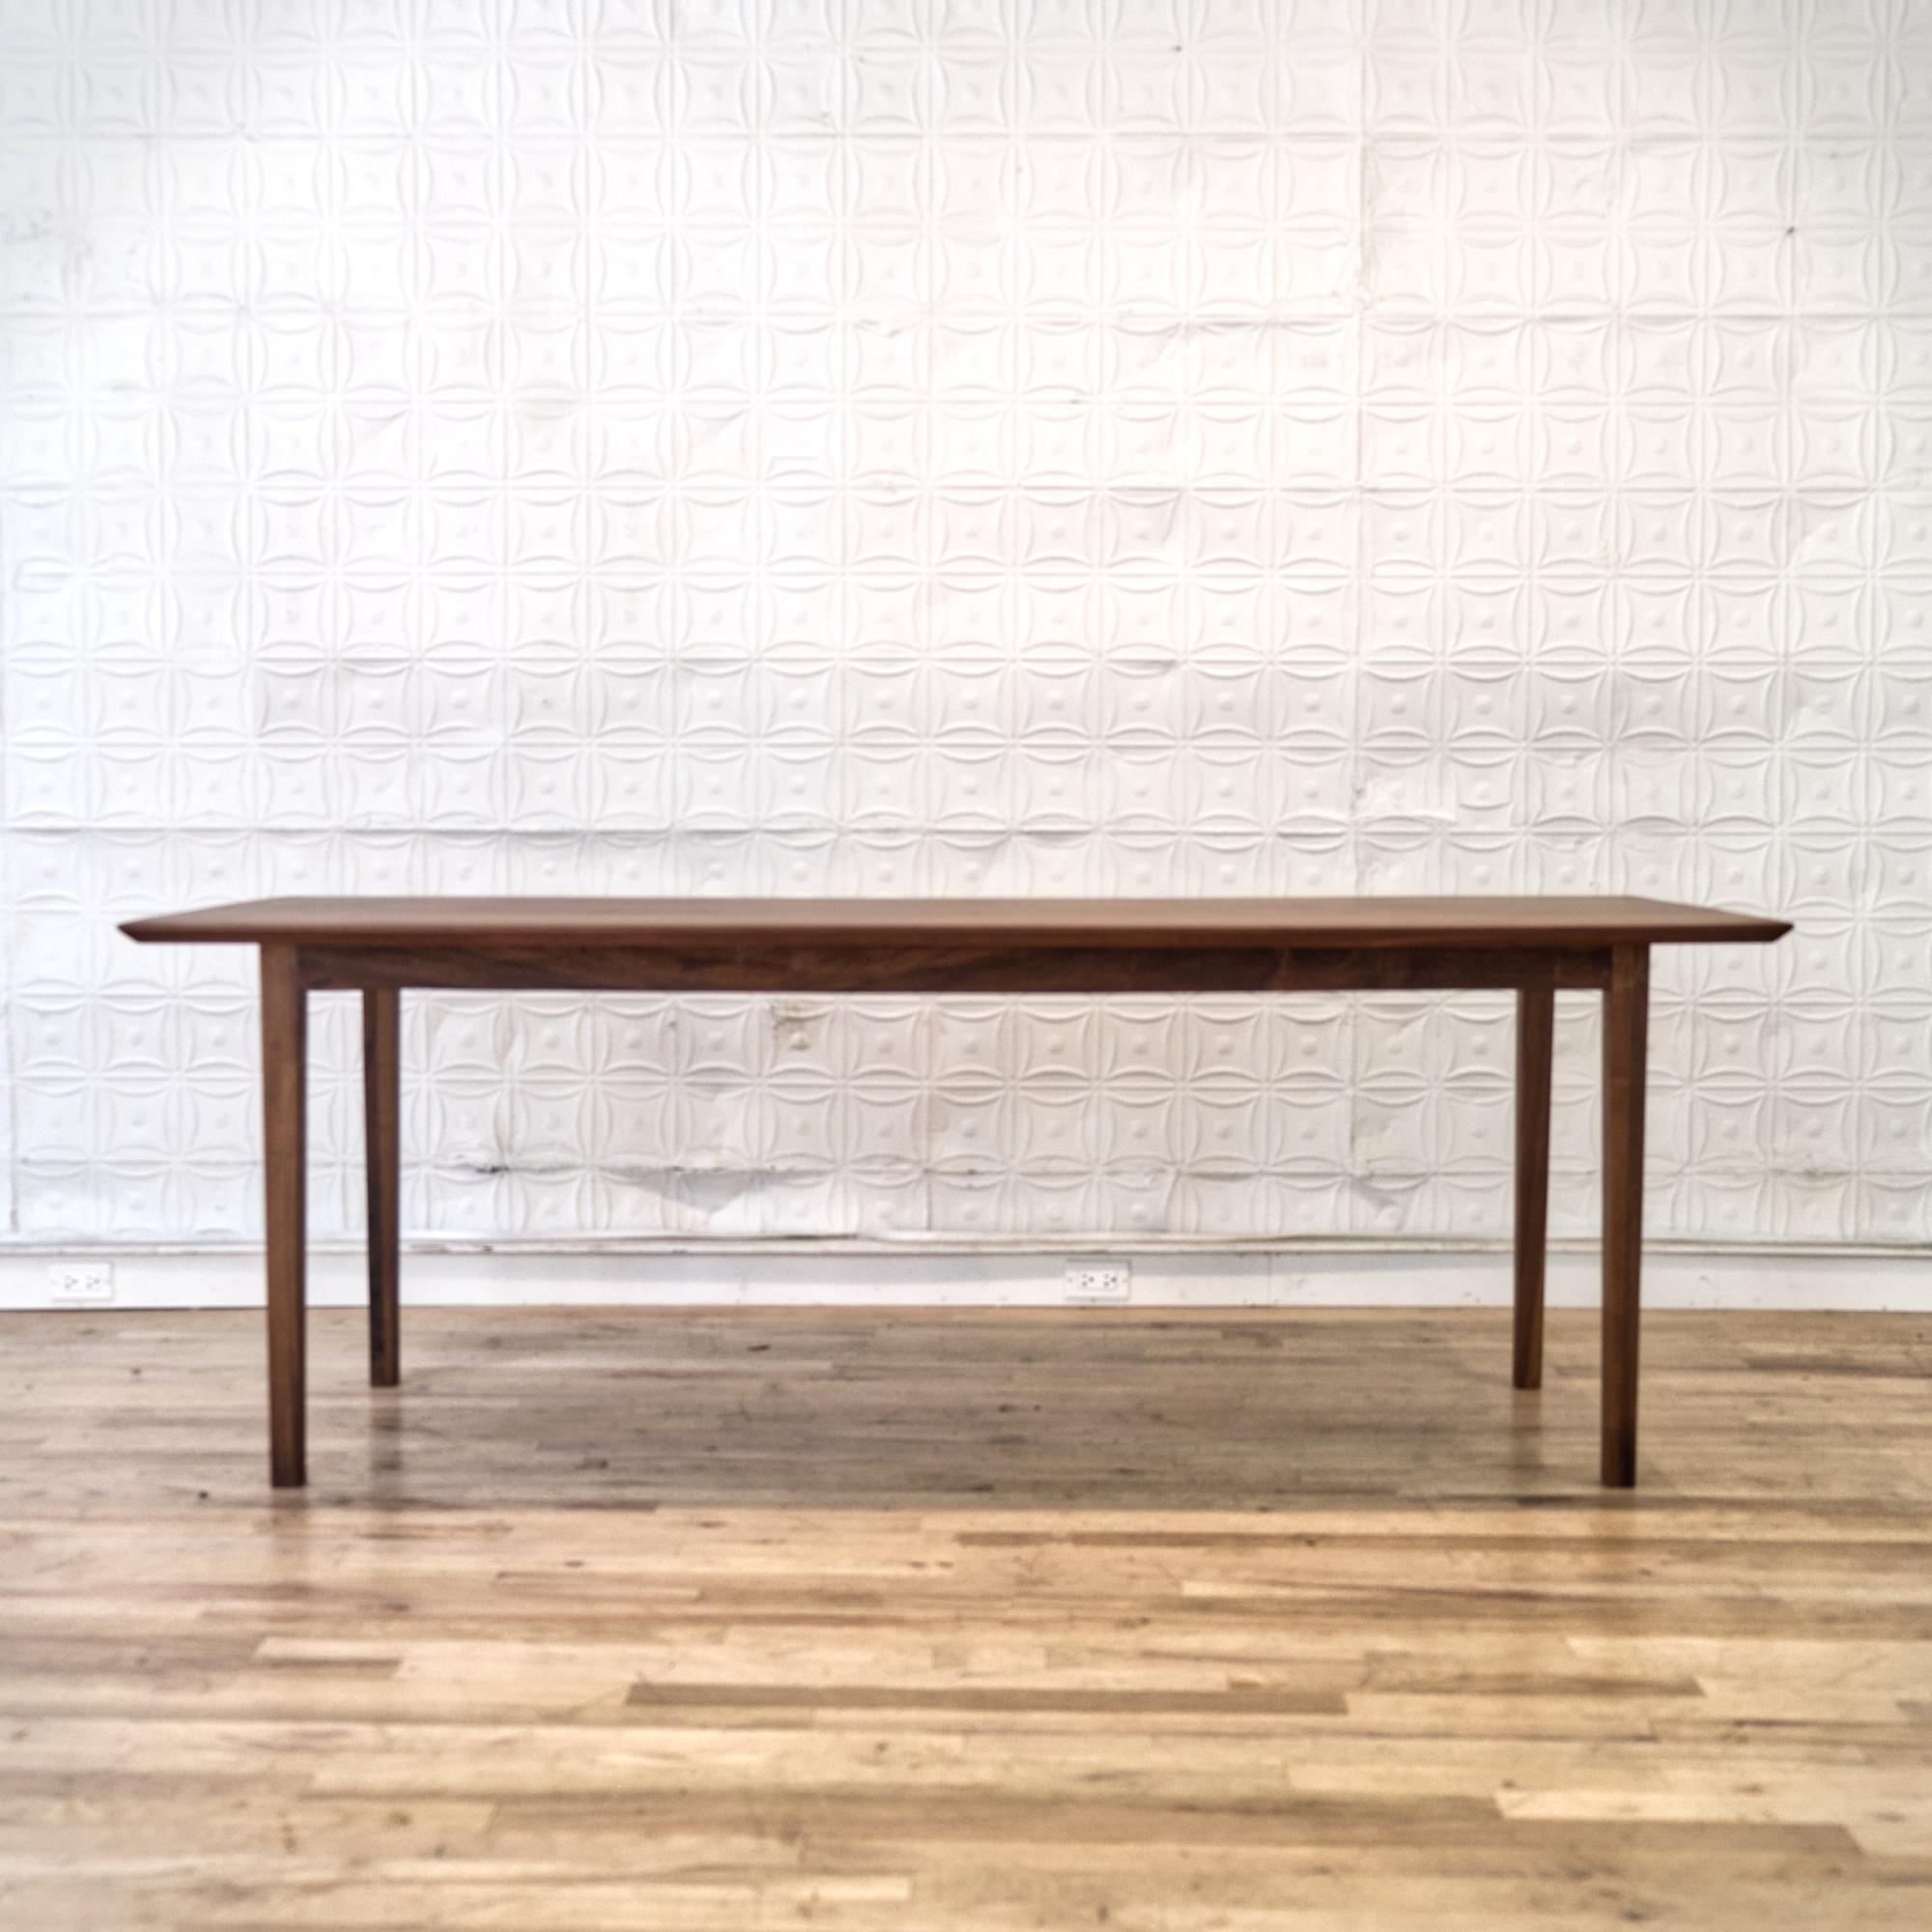 This molten grain walnut table spans in magical chamfered edges.
Handcrafted in solid walnut with tapered legs, a perfect setup for a dining table or large artist desk.
Benches are sold separately.


Own a figure ground